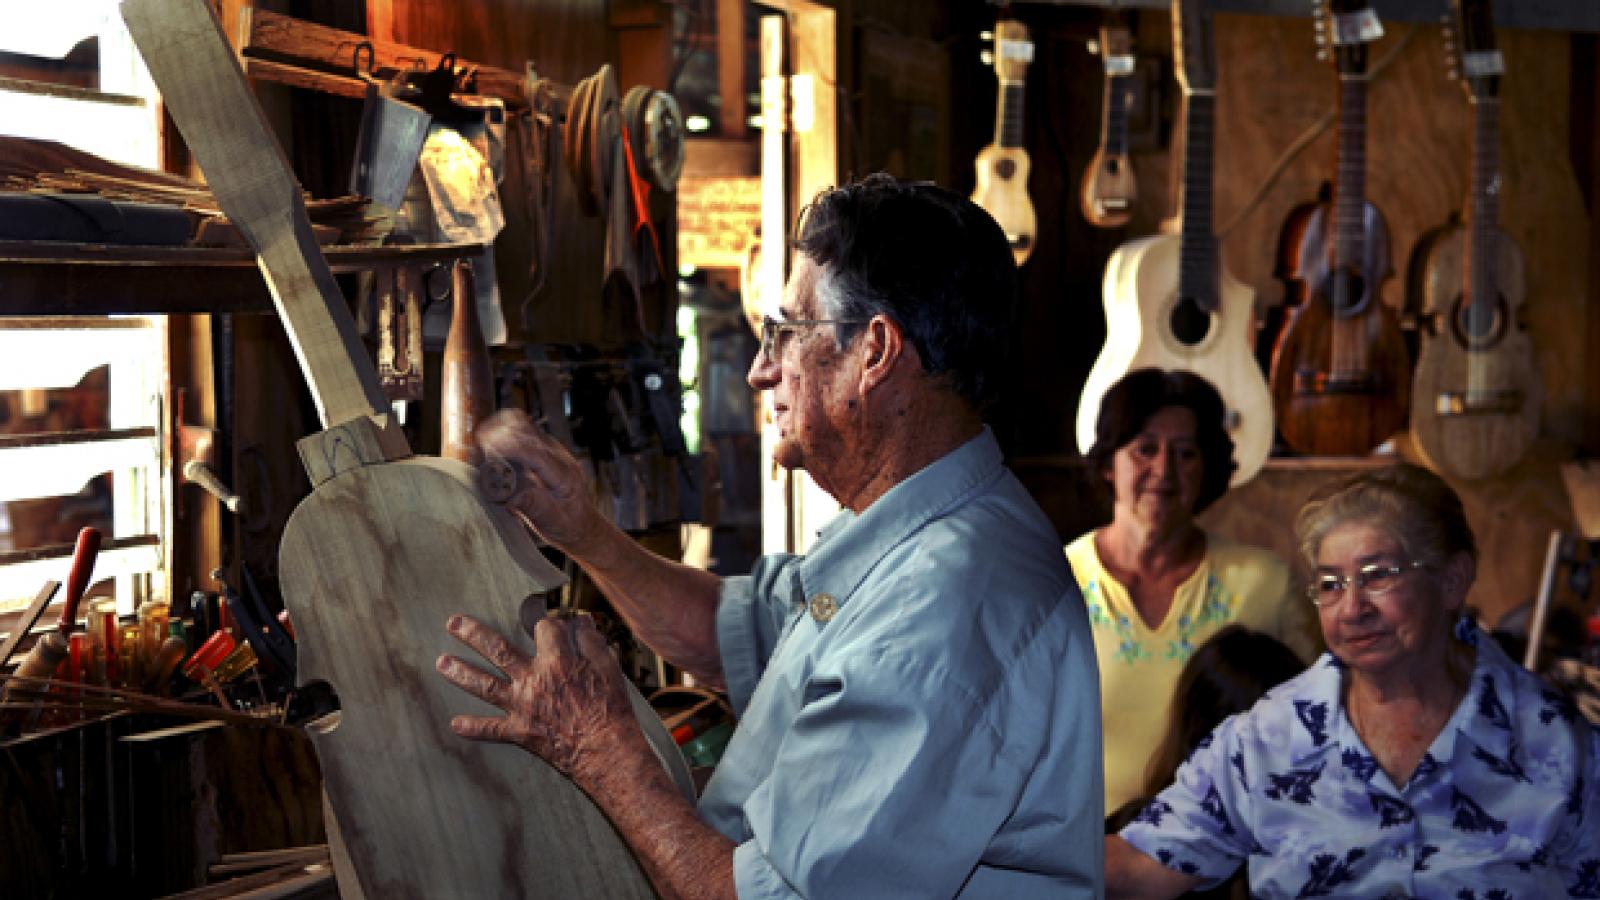 A man works on building a stringed instrument with others behind him watching.